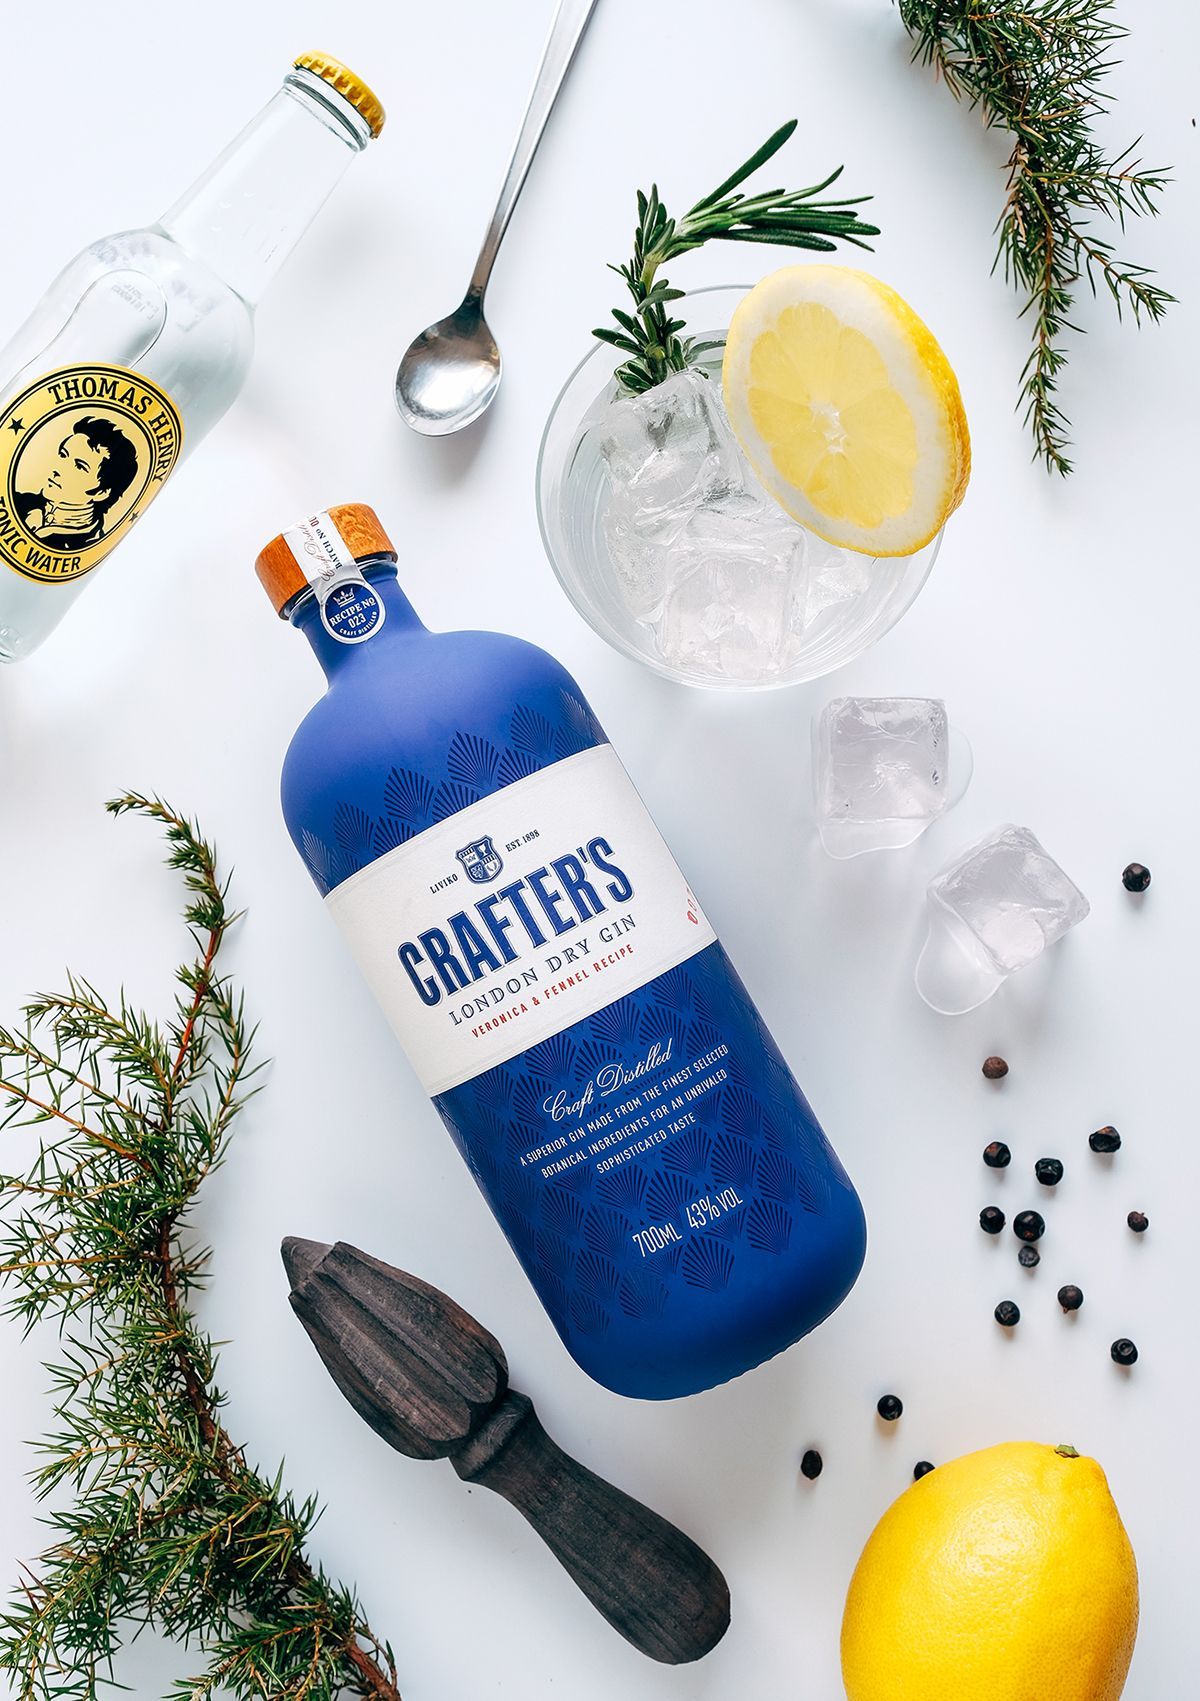 Crafters Gin on Behance